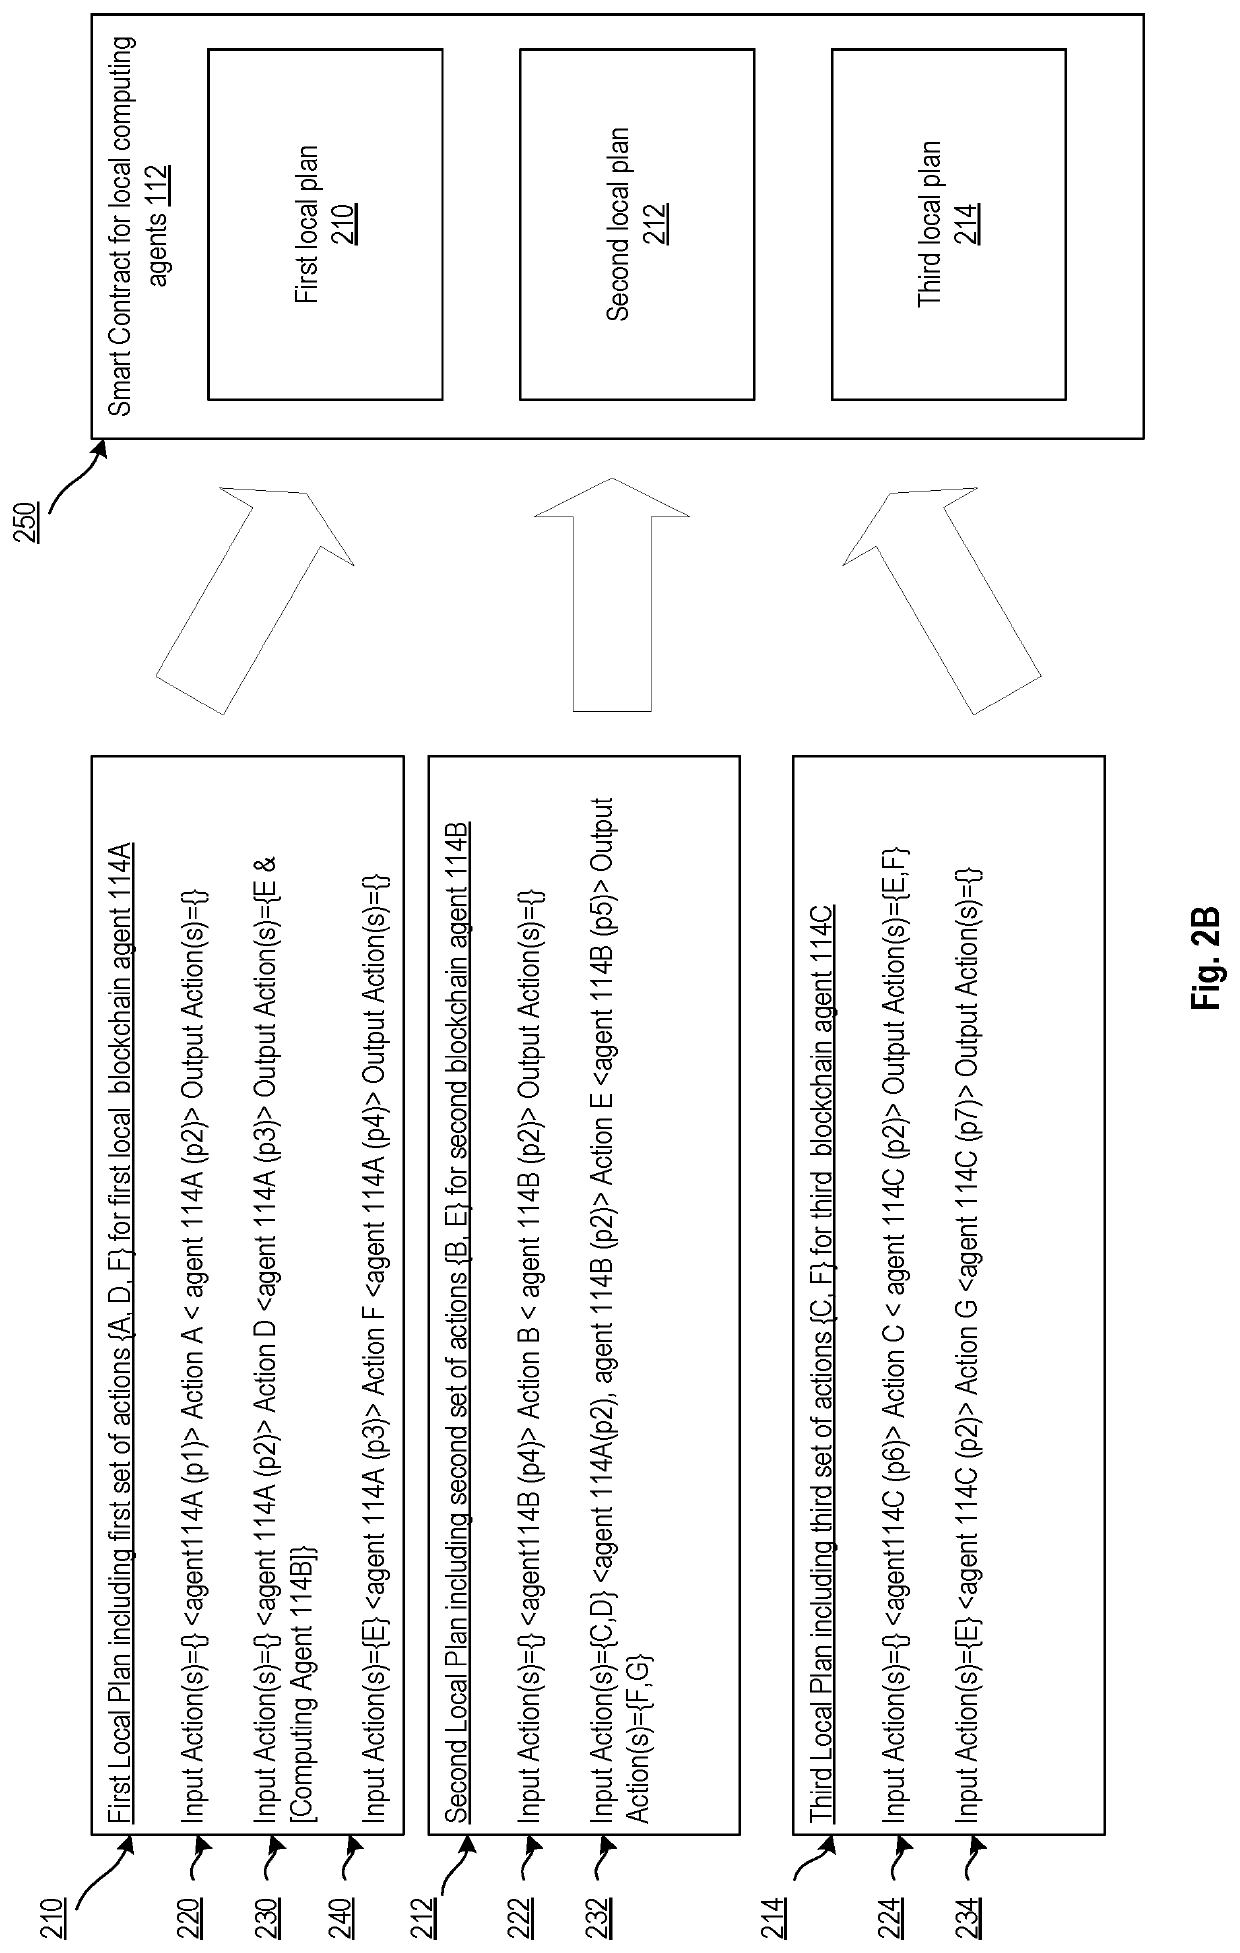 In a distributed computing system with untrusted entities method and apparatus for enabling coordinated executions of actions